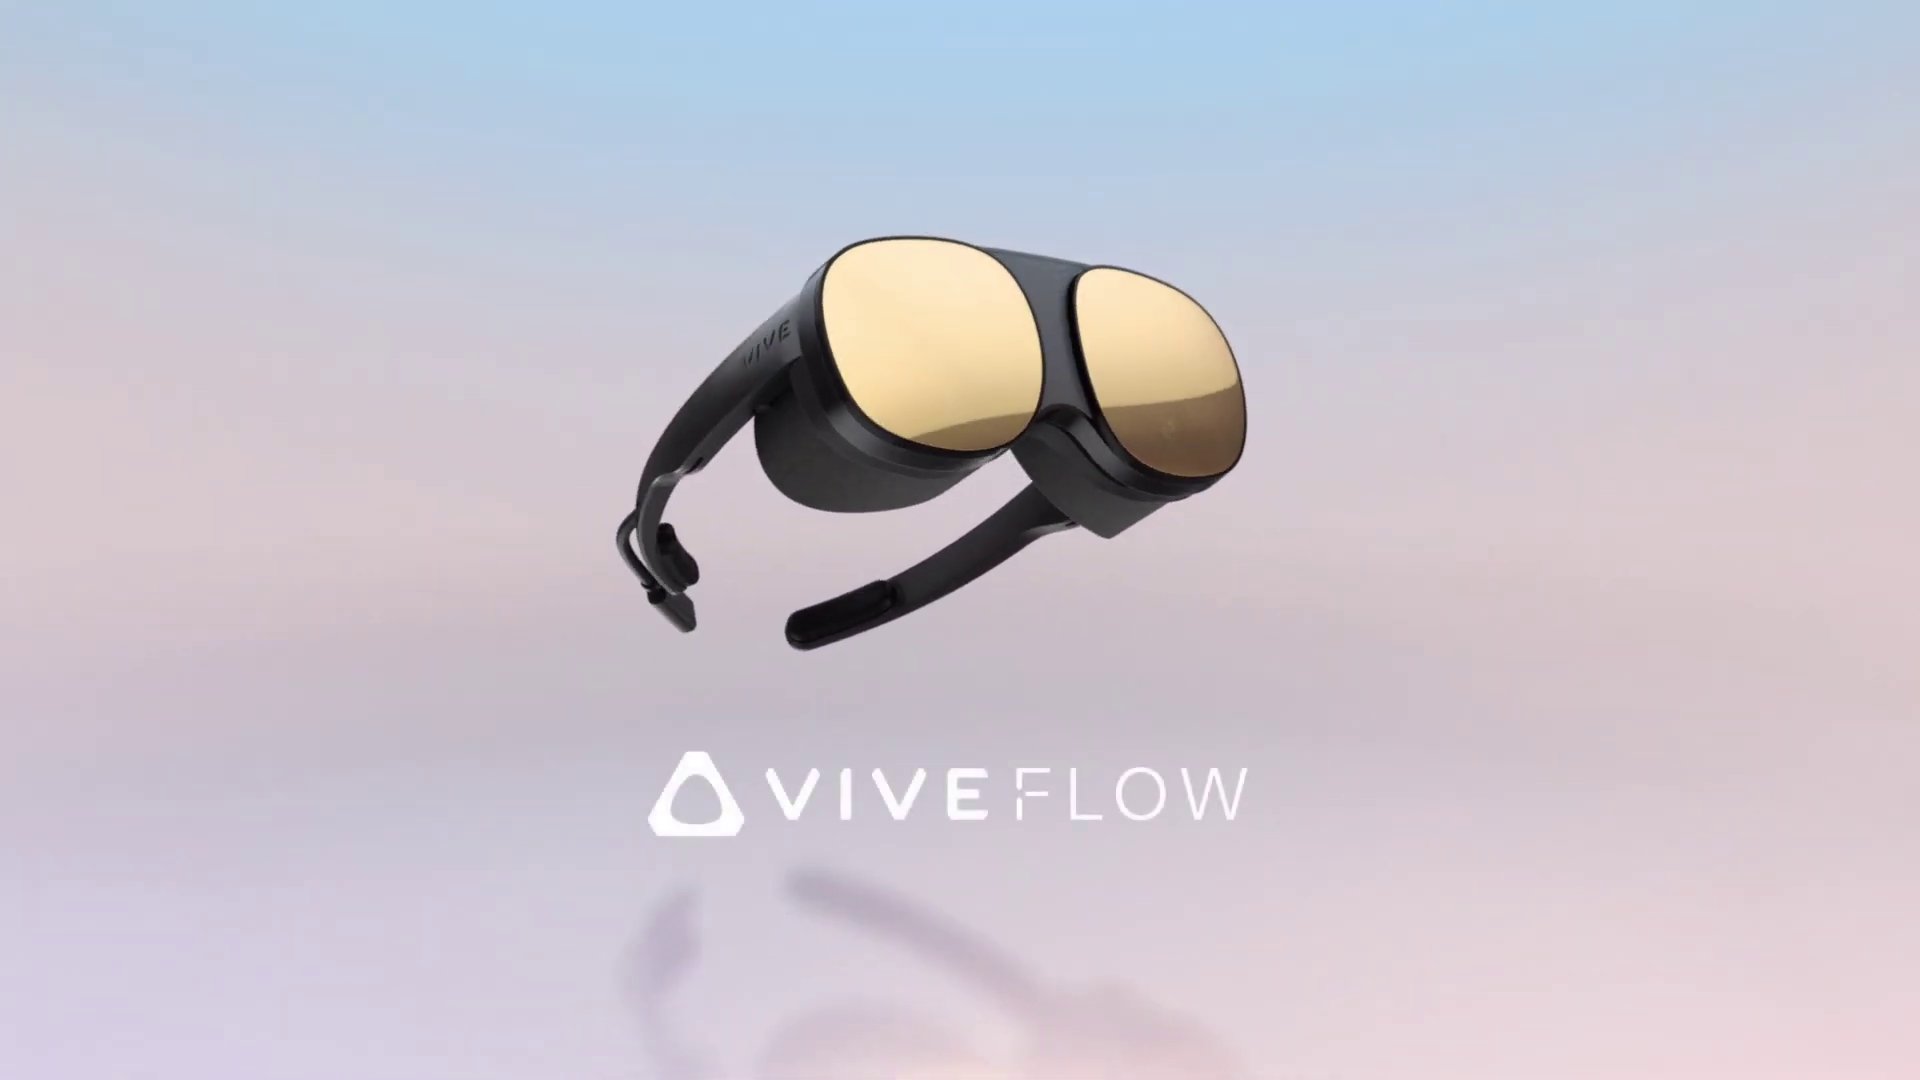 HTC reveals the $499 Vive Flow, a tiny VR headset with some big